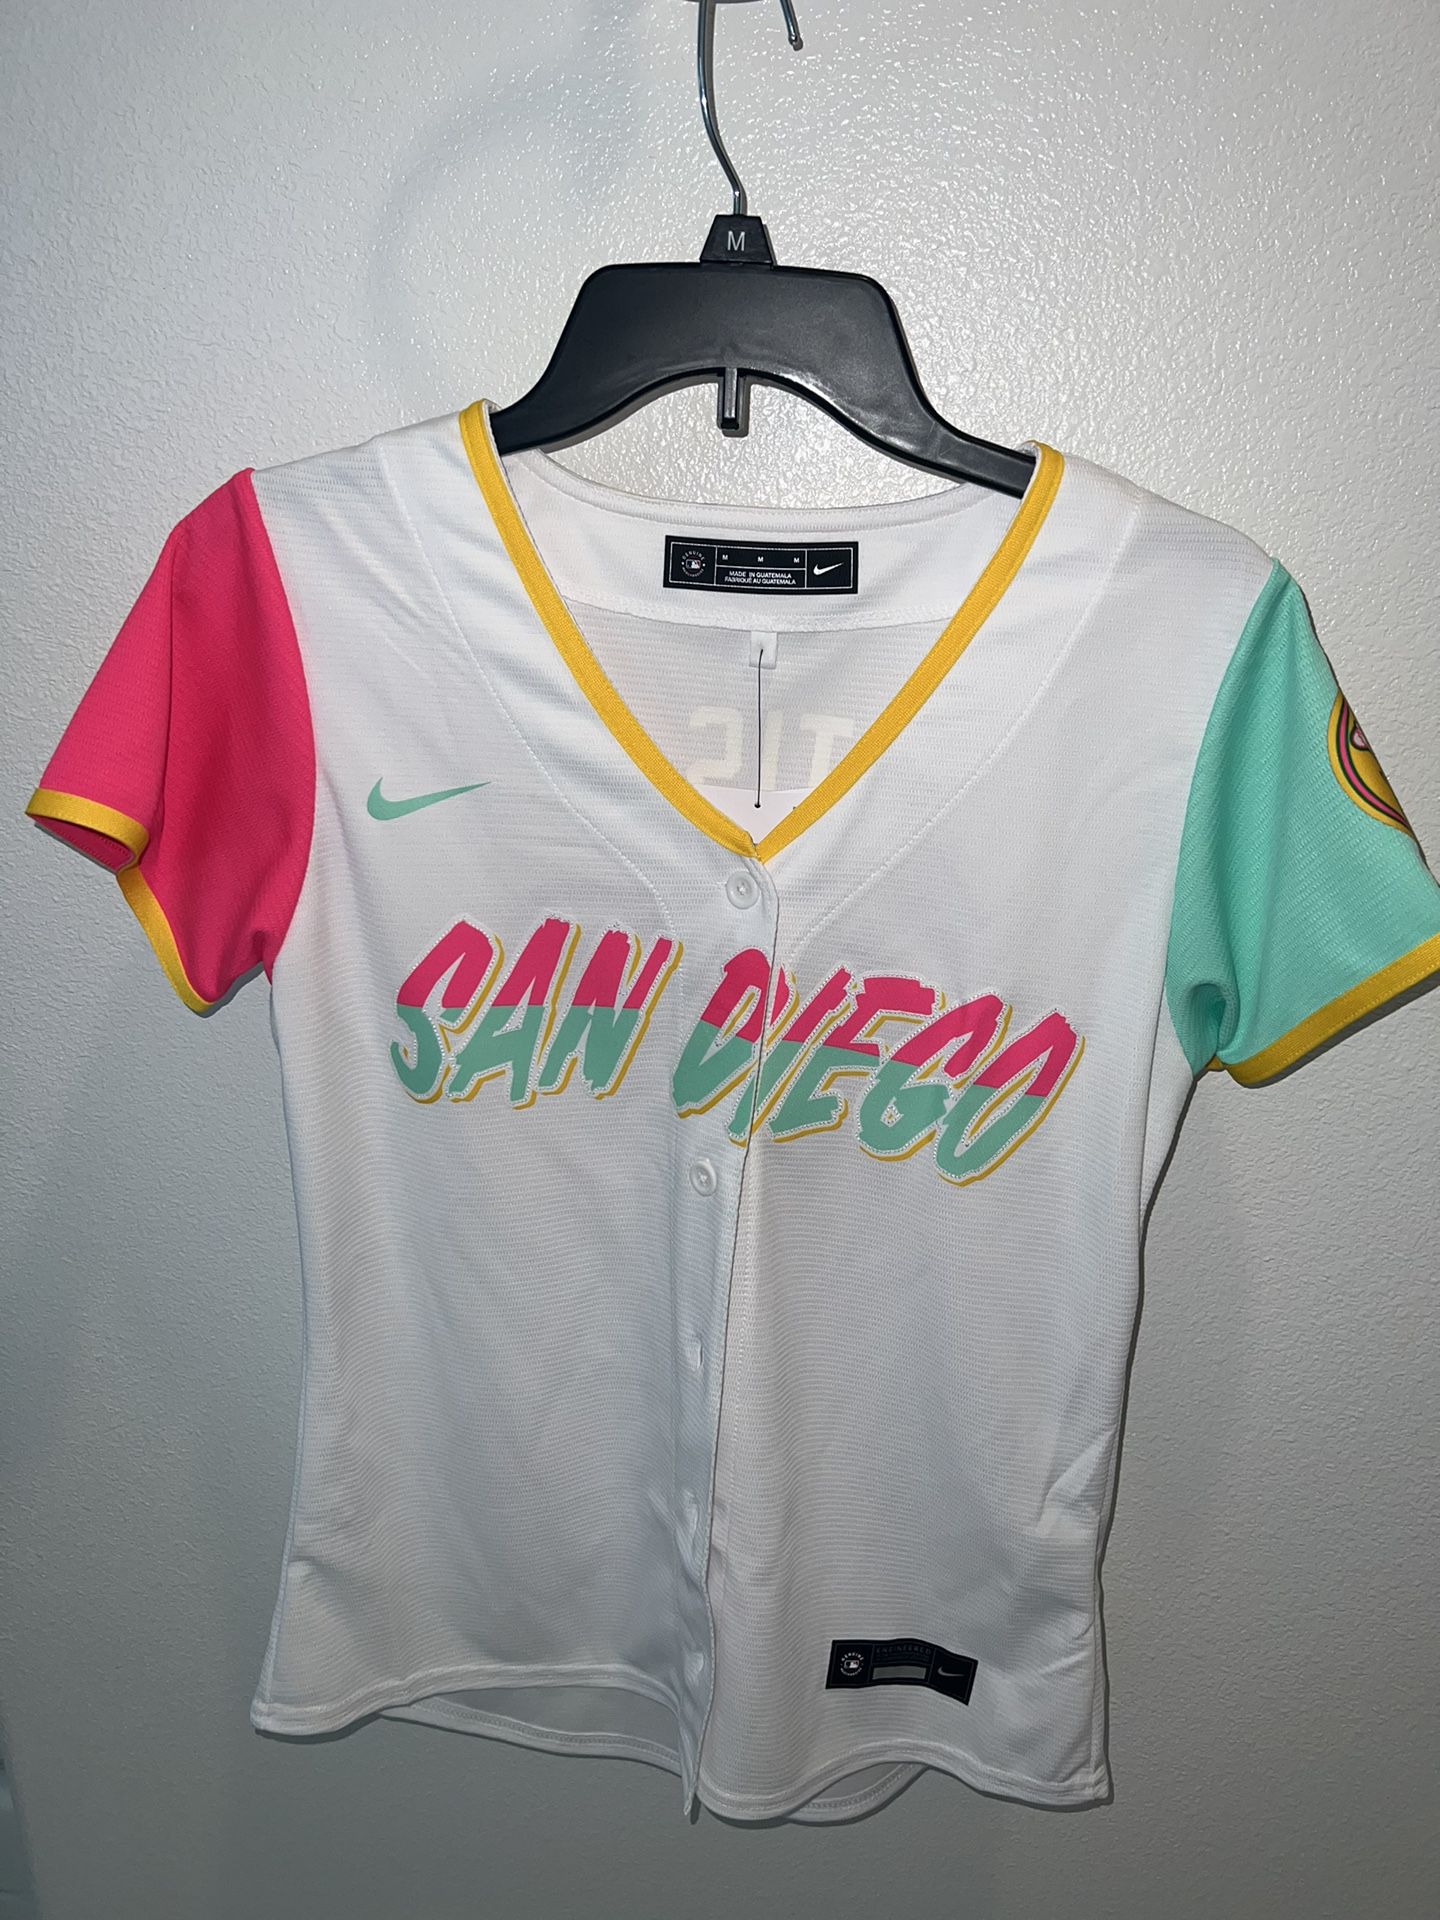 San Diego Padres Jersey for Sale in Homeland, CA - OfferUp